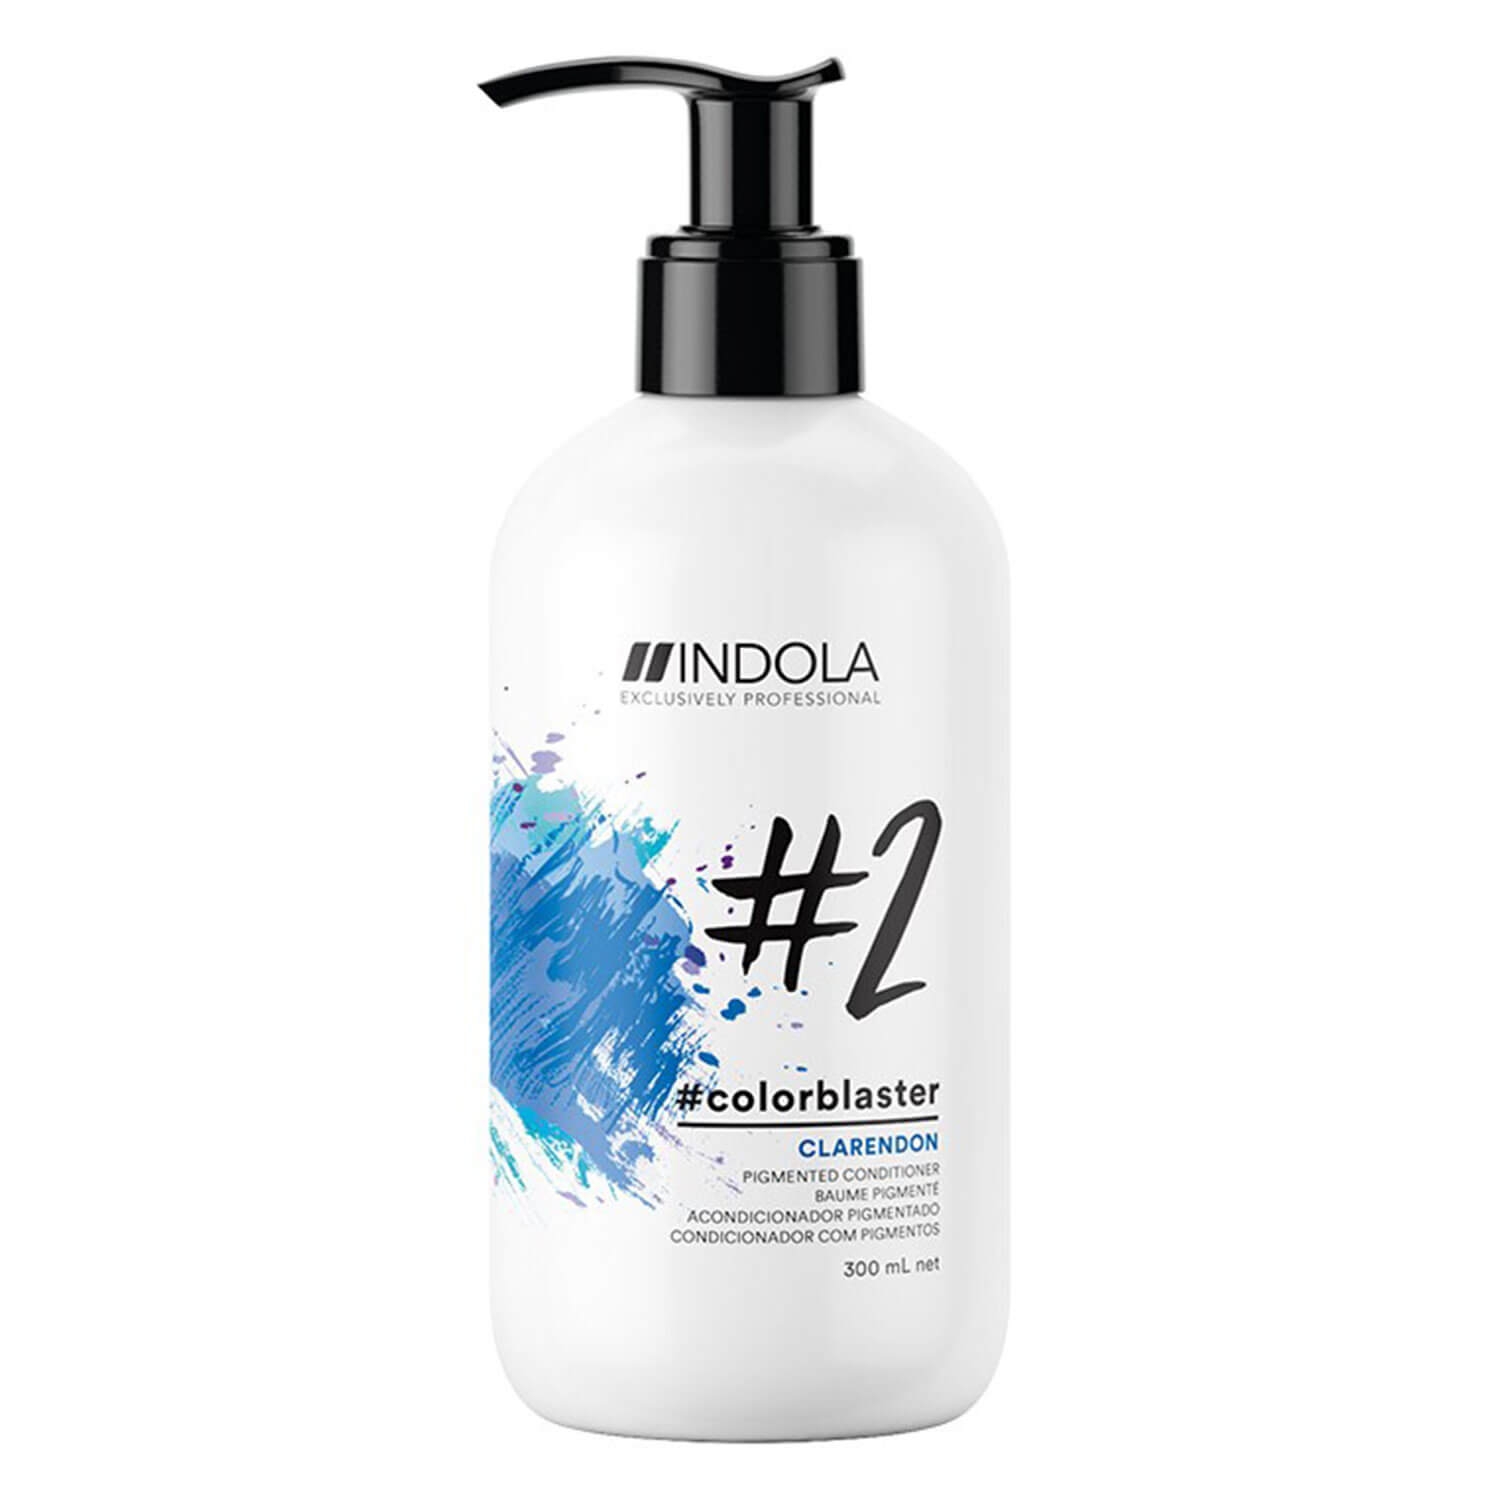 Product image from colorblaster - Pigmented Conditioner Clarendon